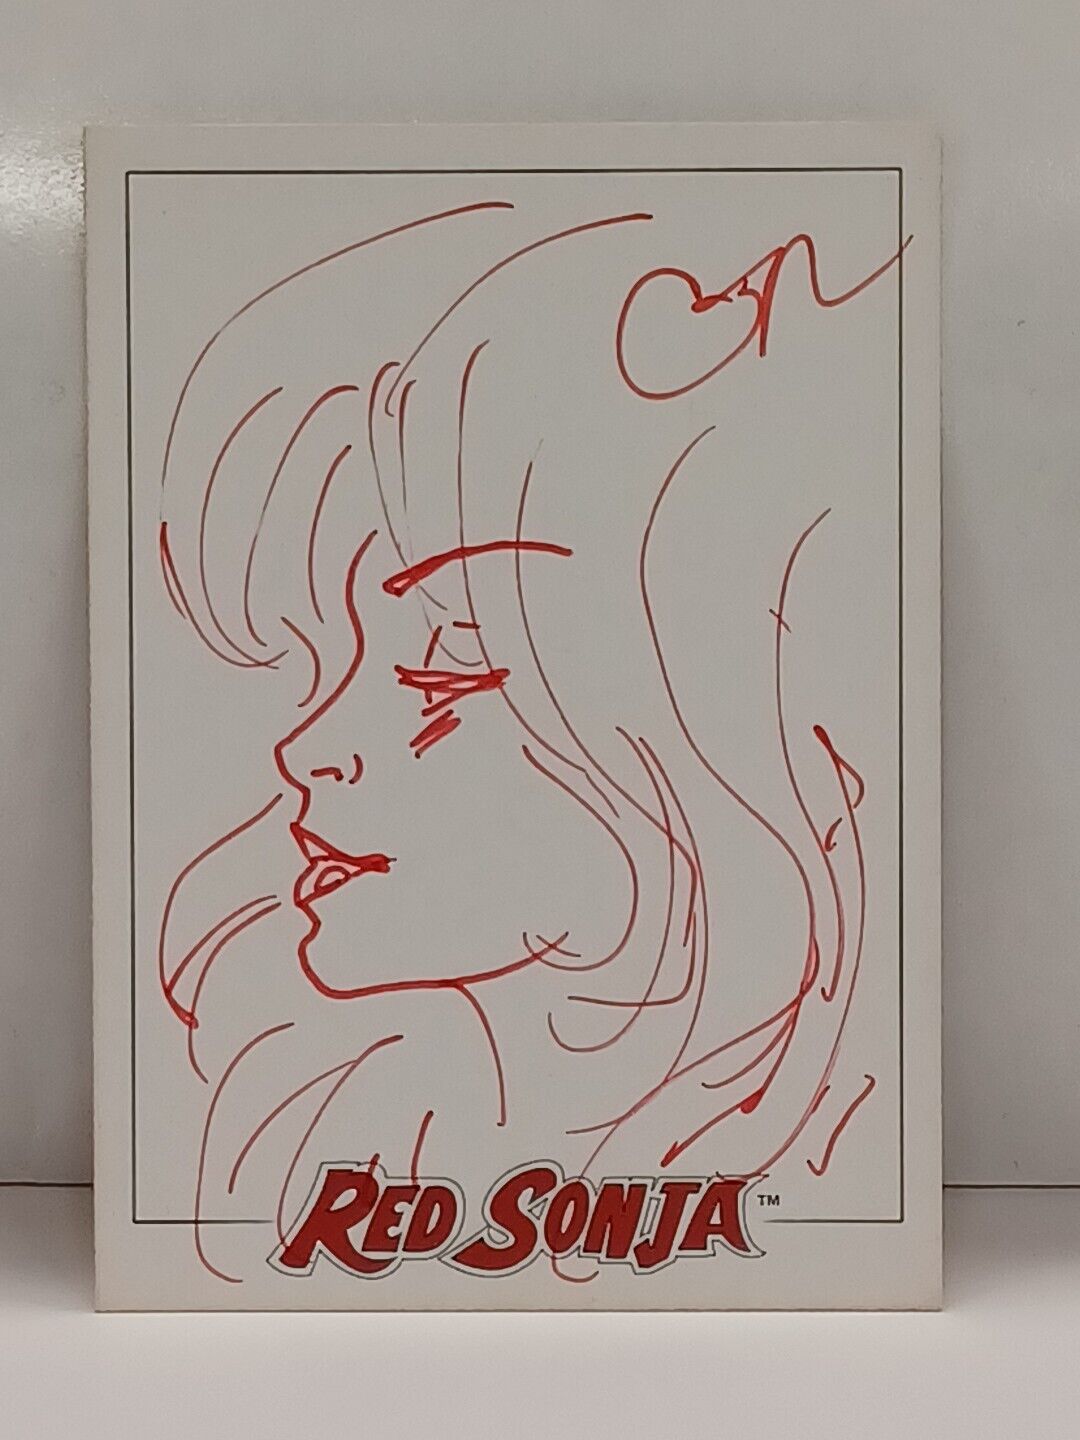 RED SONJA 2005 DYNAMIC FORCES LIMITED EDITION HAND DRAWN SKETCH CARD